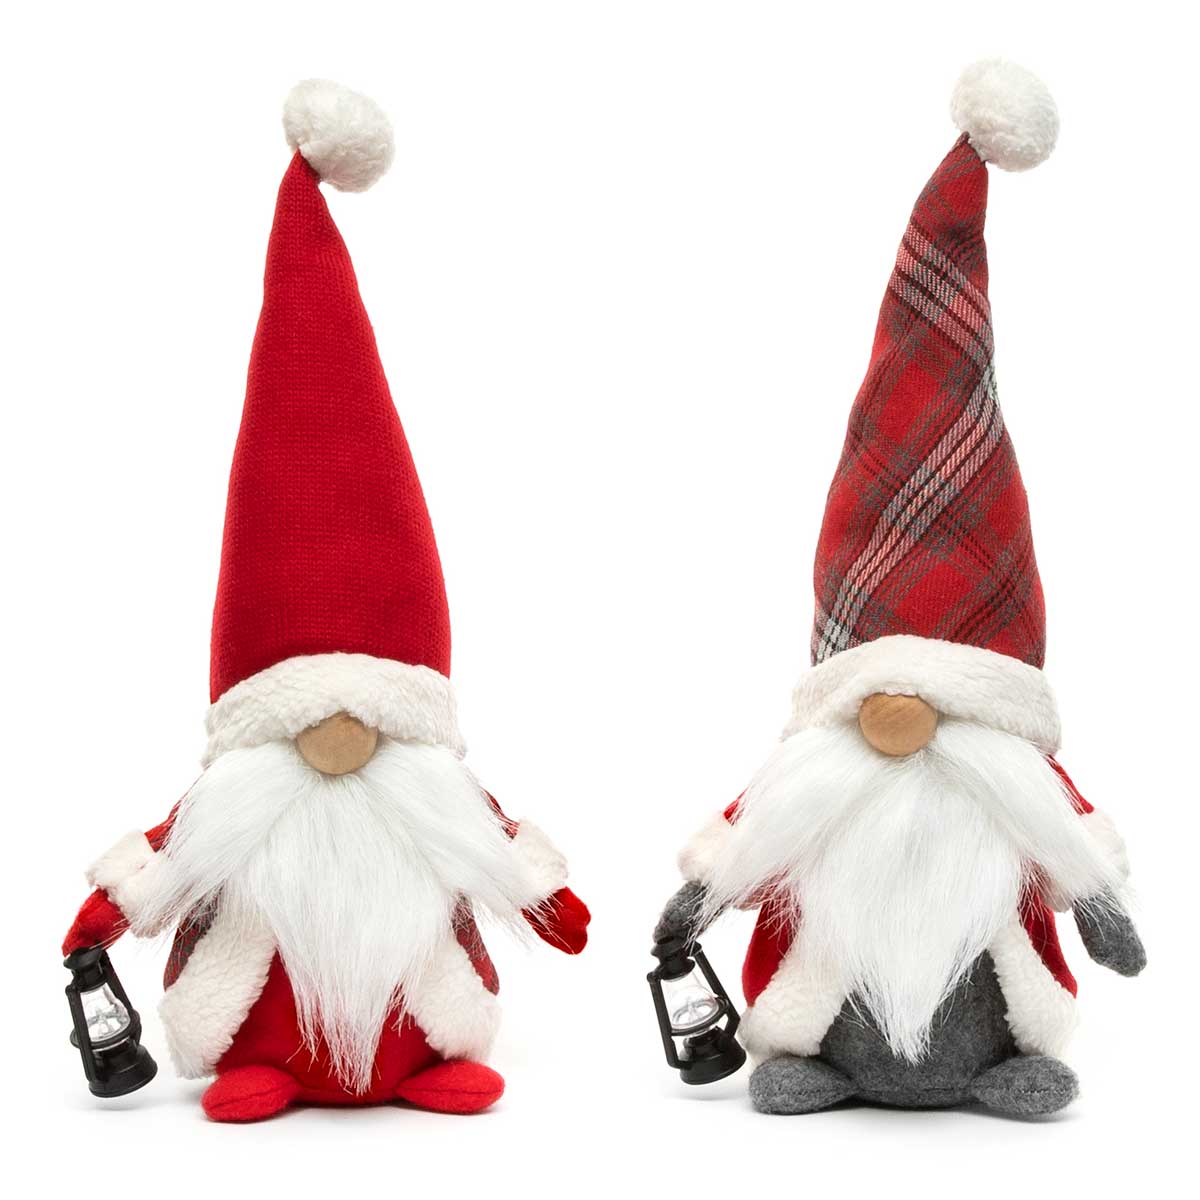 !SEASON GREETINGS GNOME RED WITH LANTERN 2 AST 15"